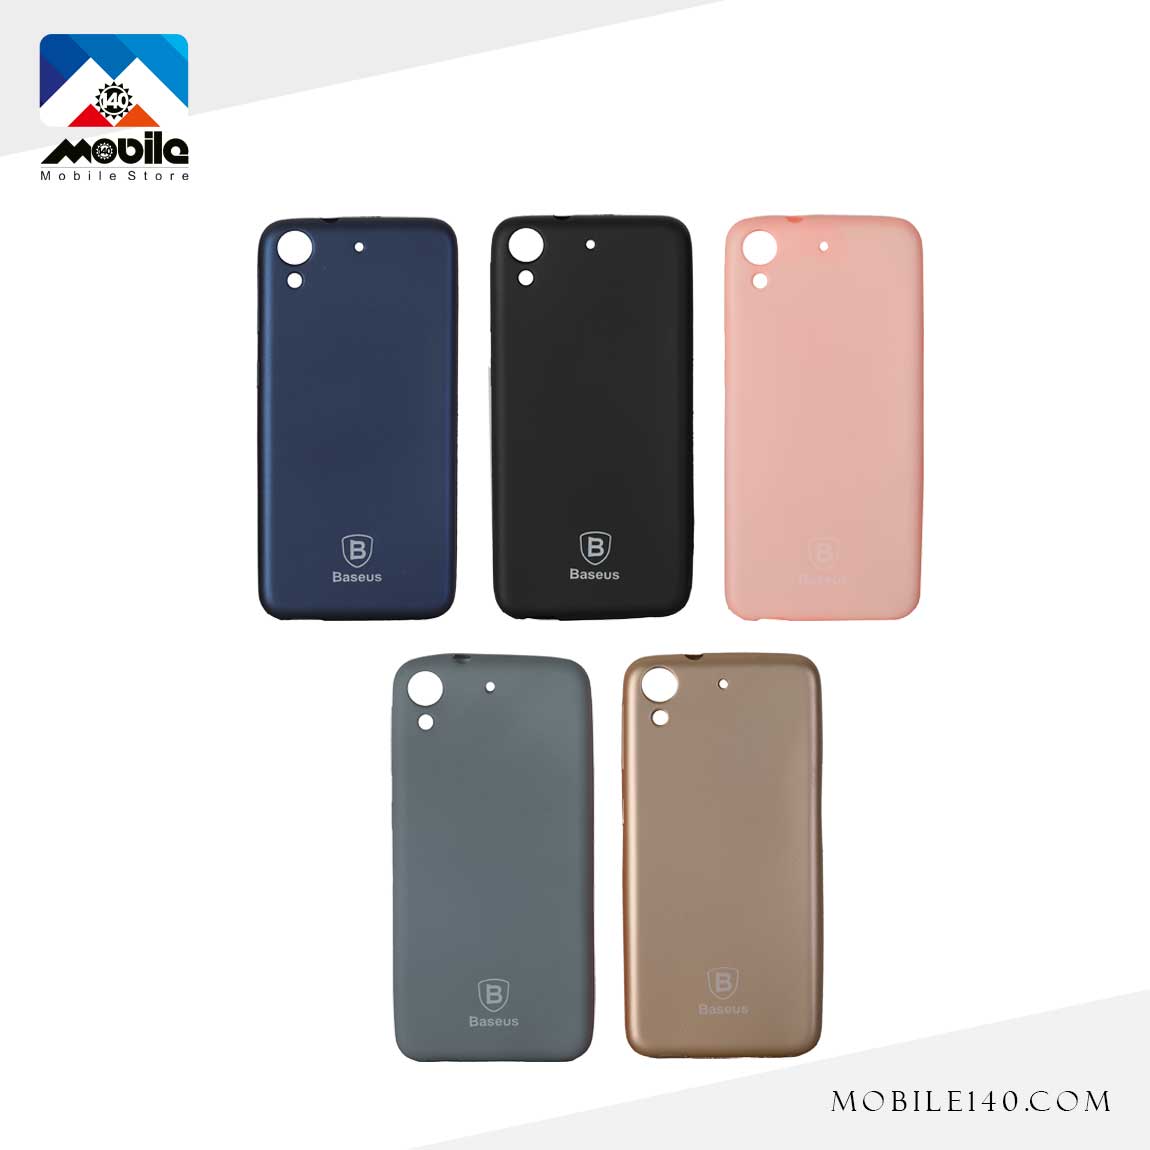 Baseus Covers For HTC D626 1